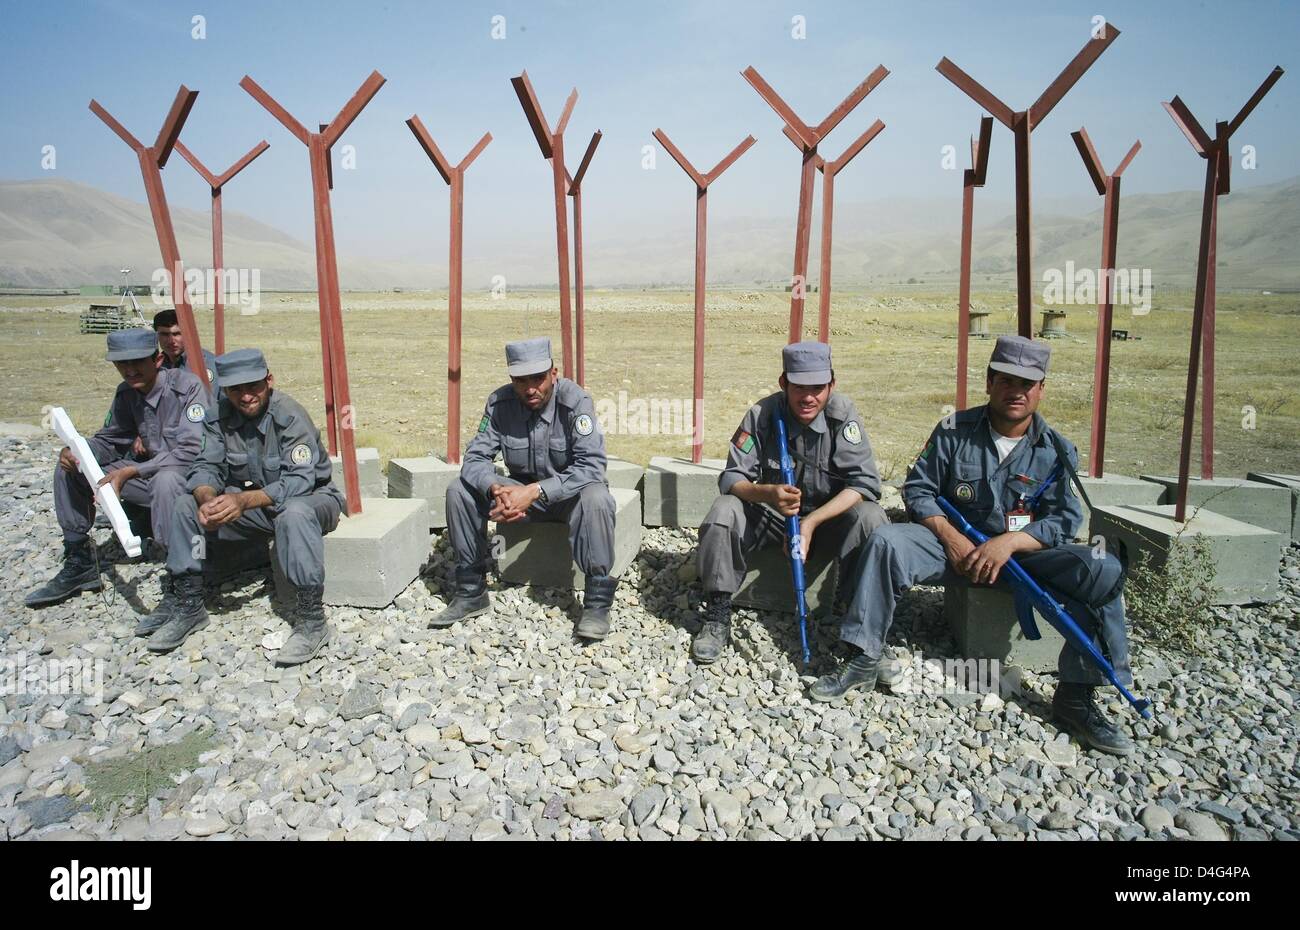 ANP (Afghan National Police) members seen at their training camp in Feisabad, Afghanistan, 29 September 2008. Military police of German Bundeswehr's ISAF contingent supports the training of Afghan National Police forces. Photo: MAURIZIO GAMBARINI Stock Photo